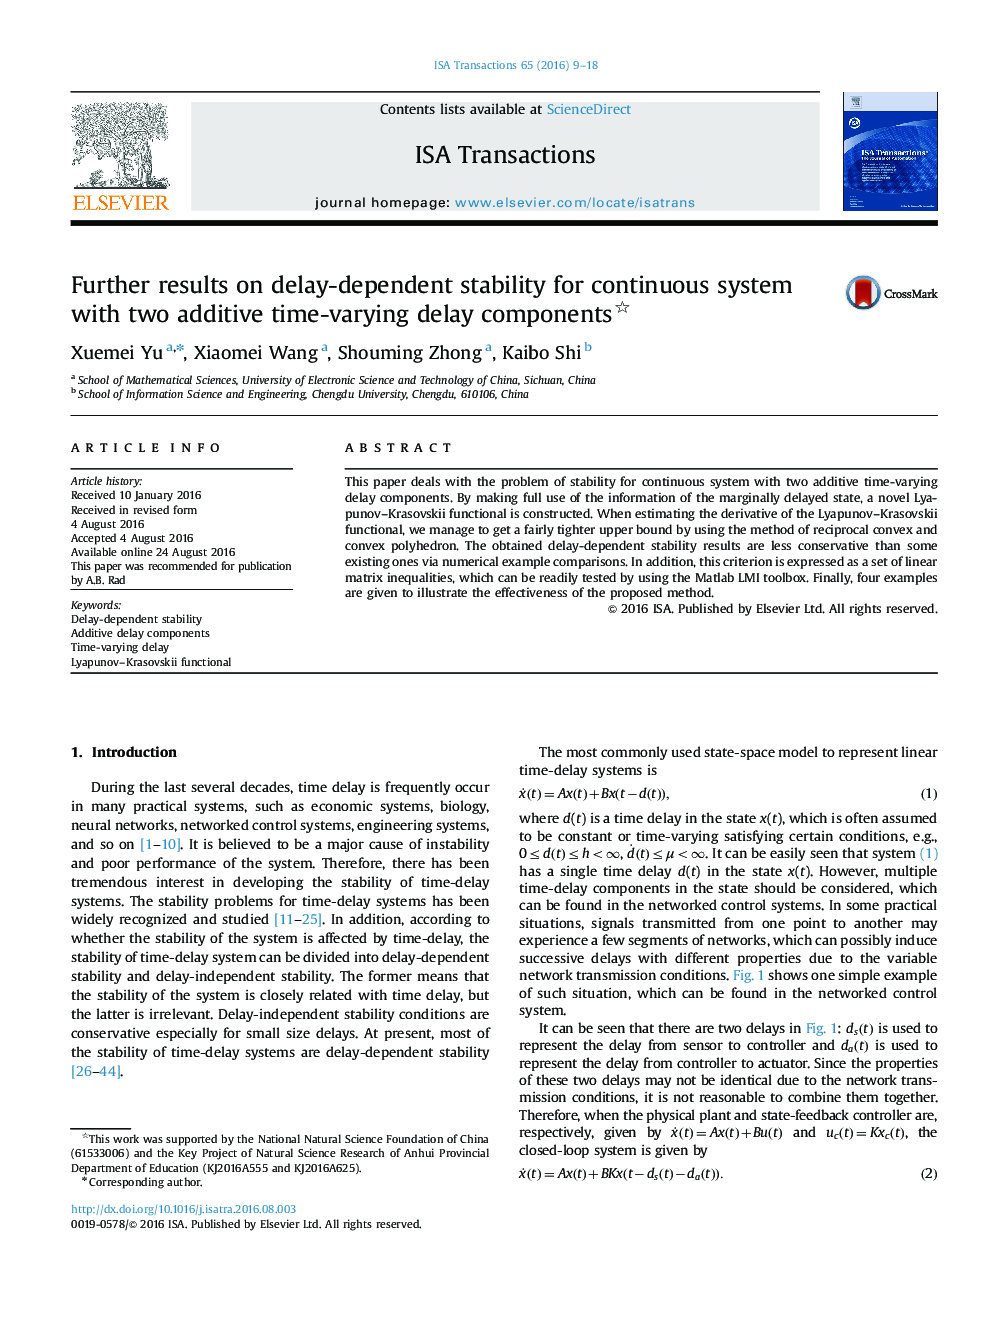 Further results on delay-dependent stability for continuous system with two additive time-varying delay components